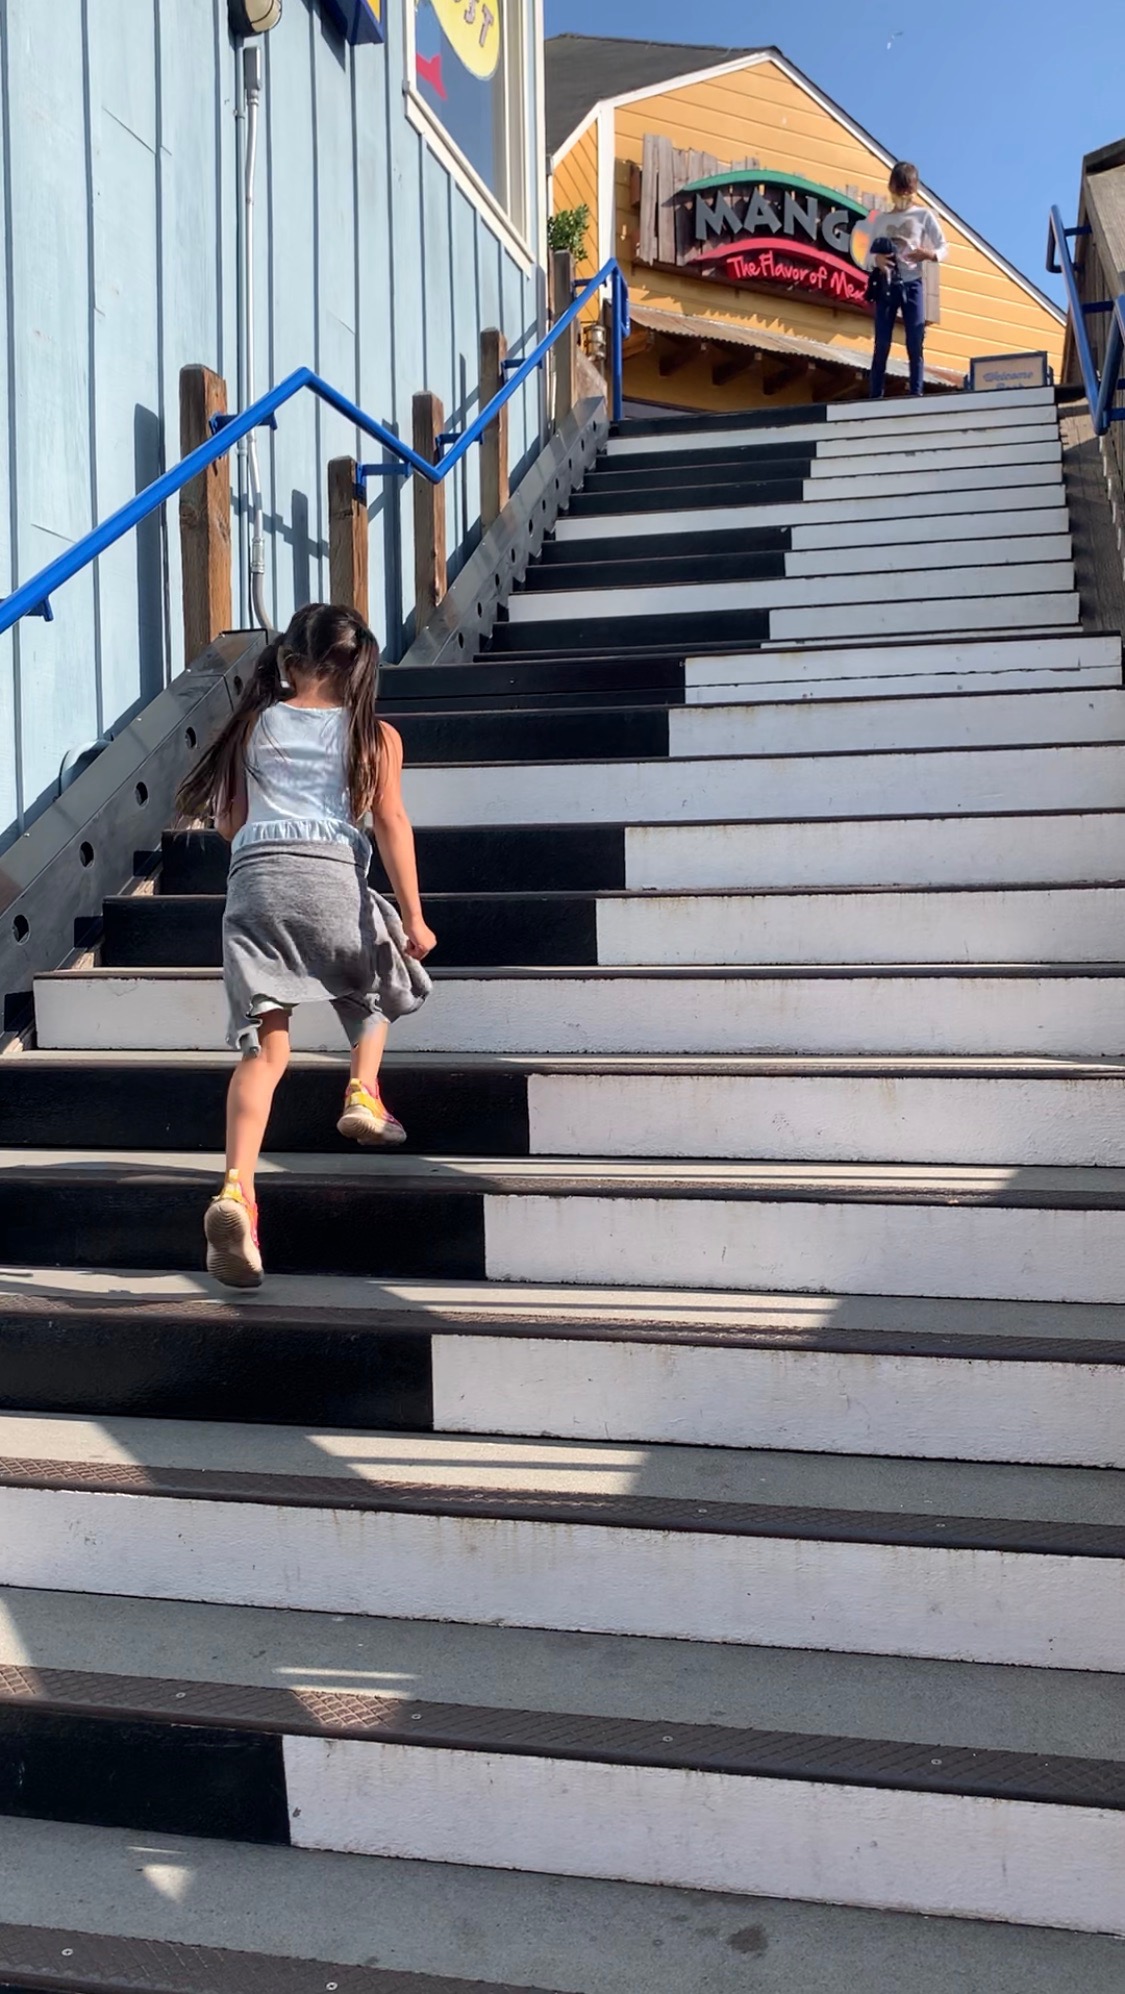 piano stairs at Pier 39 in San Francisco